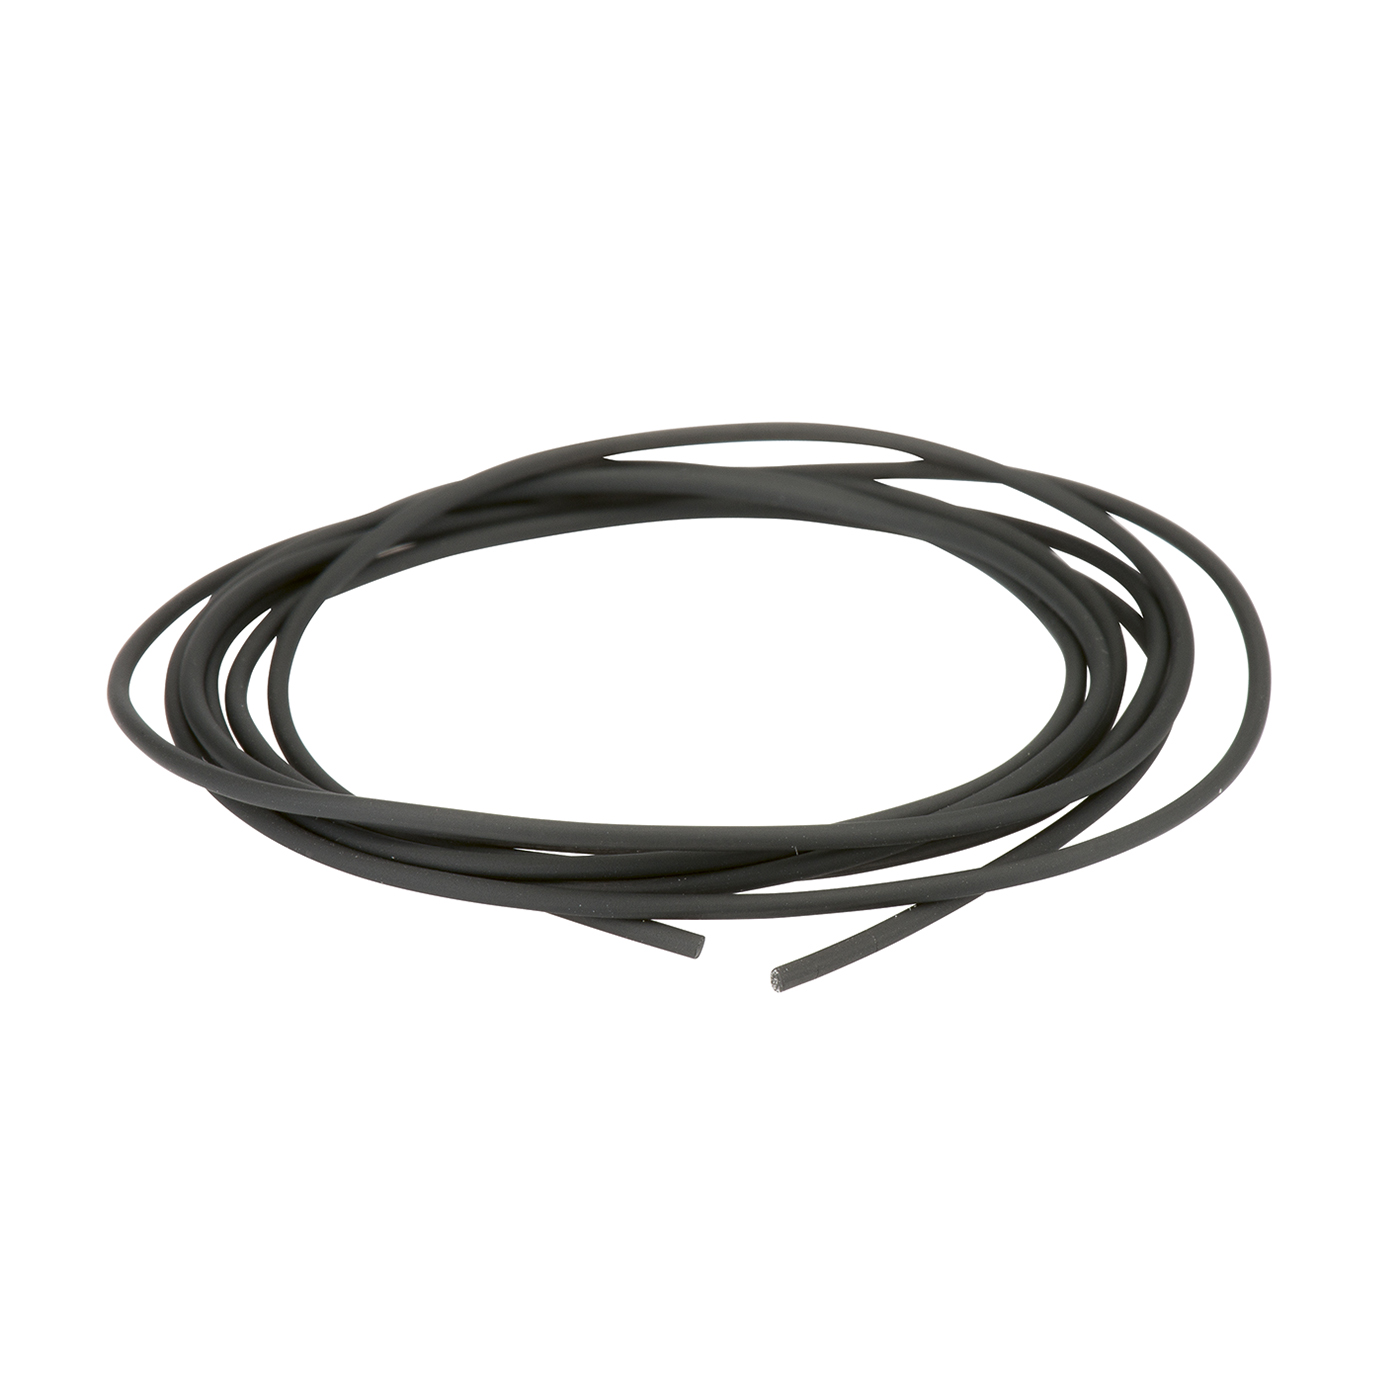 Rubber Cord, ø 1.2 mm, by the Meter - 1 m